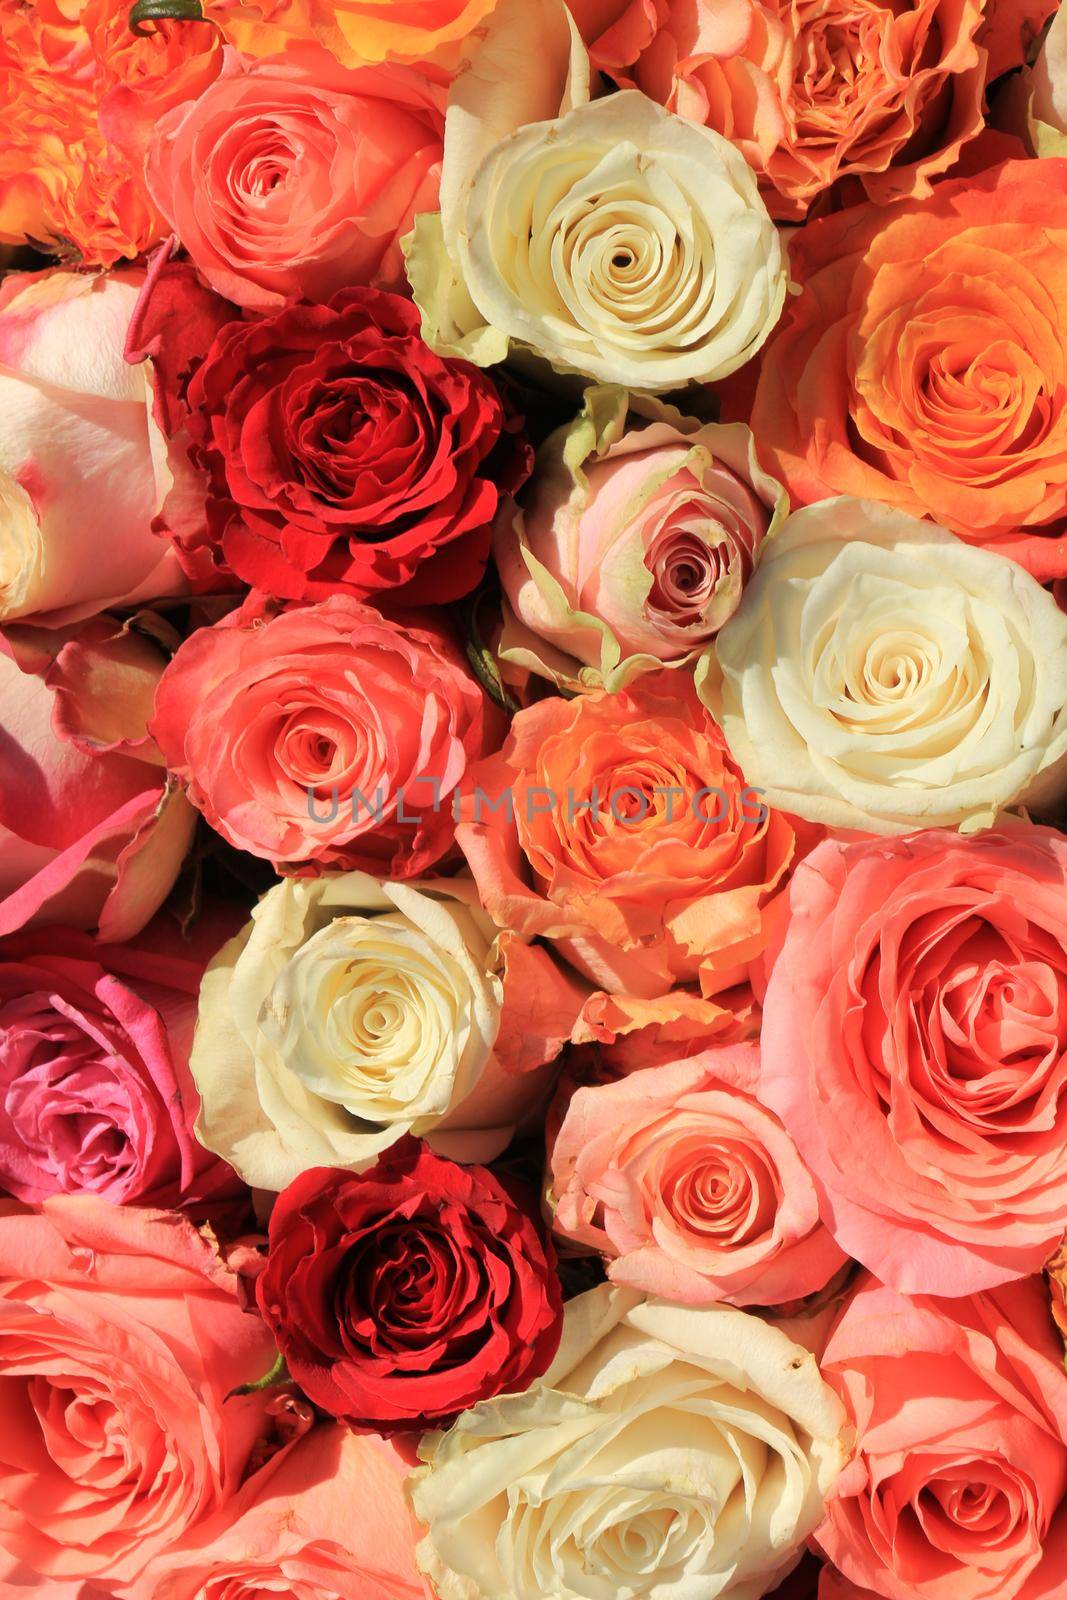 Mixed bridal bouquet in various shades of orange and pink by studioportosabbia